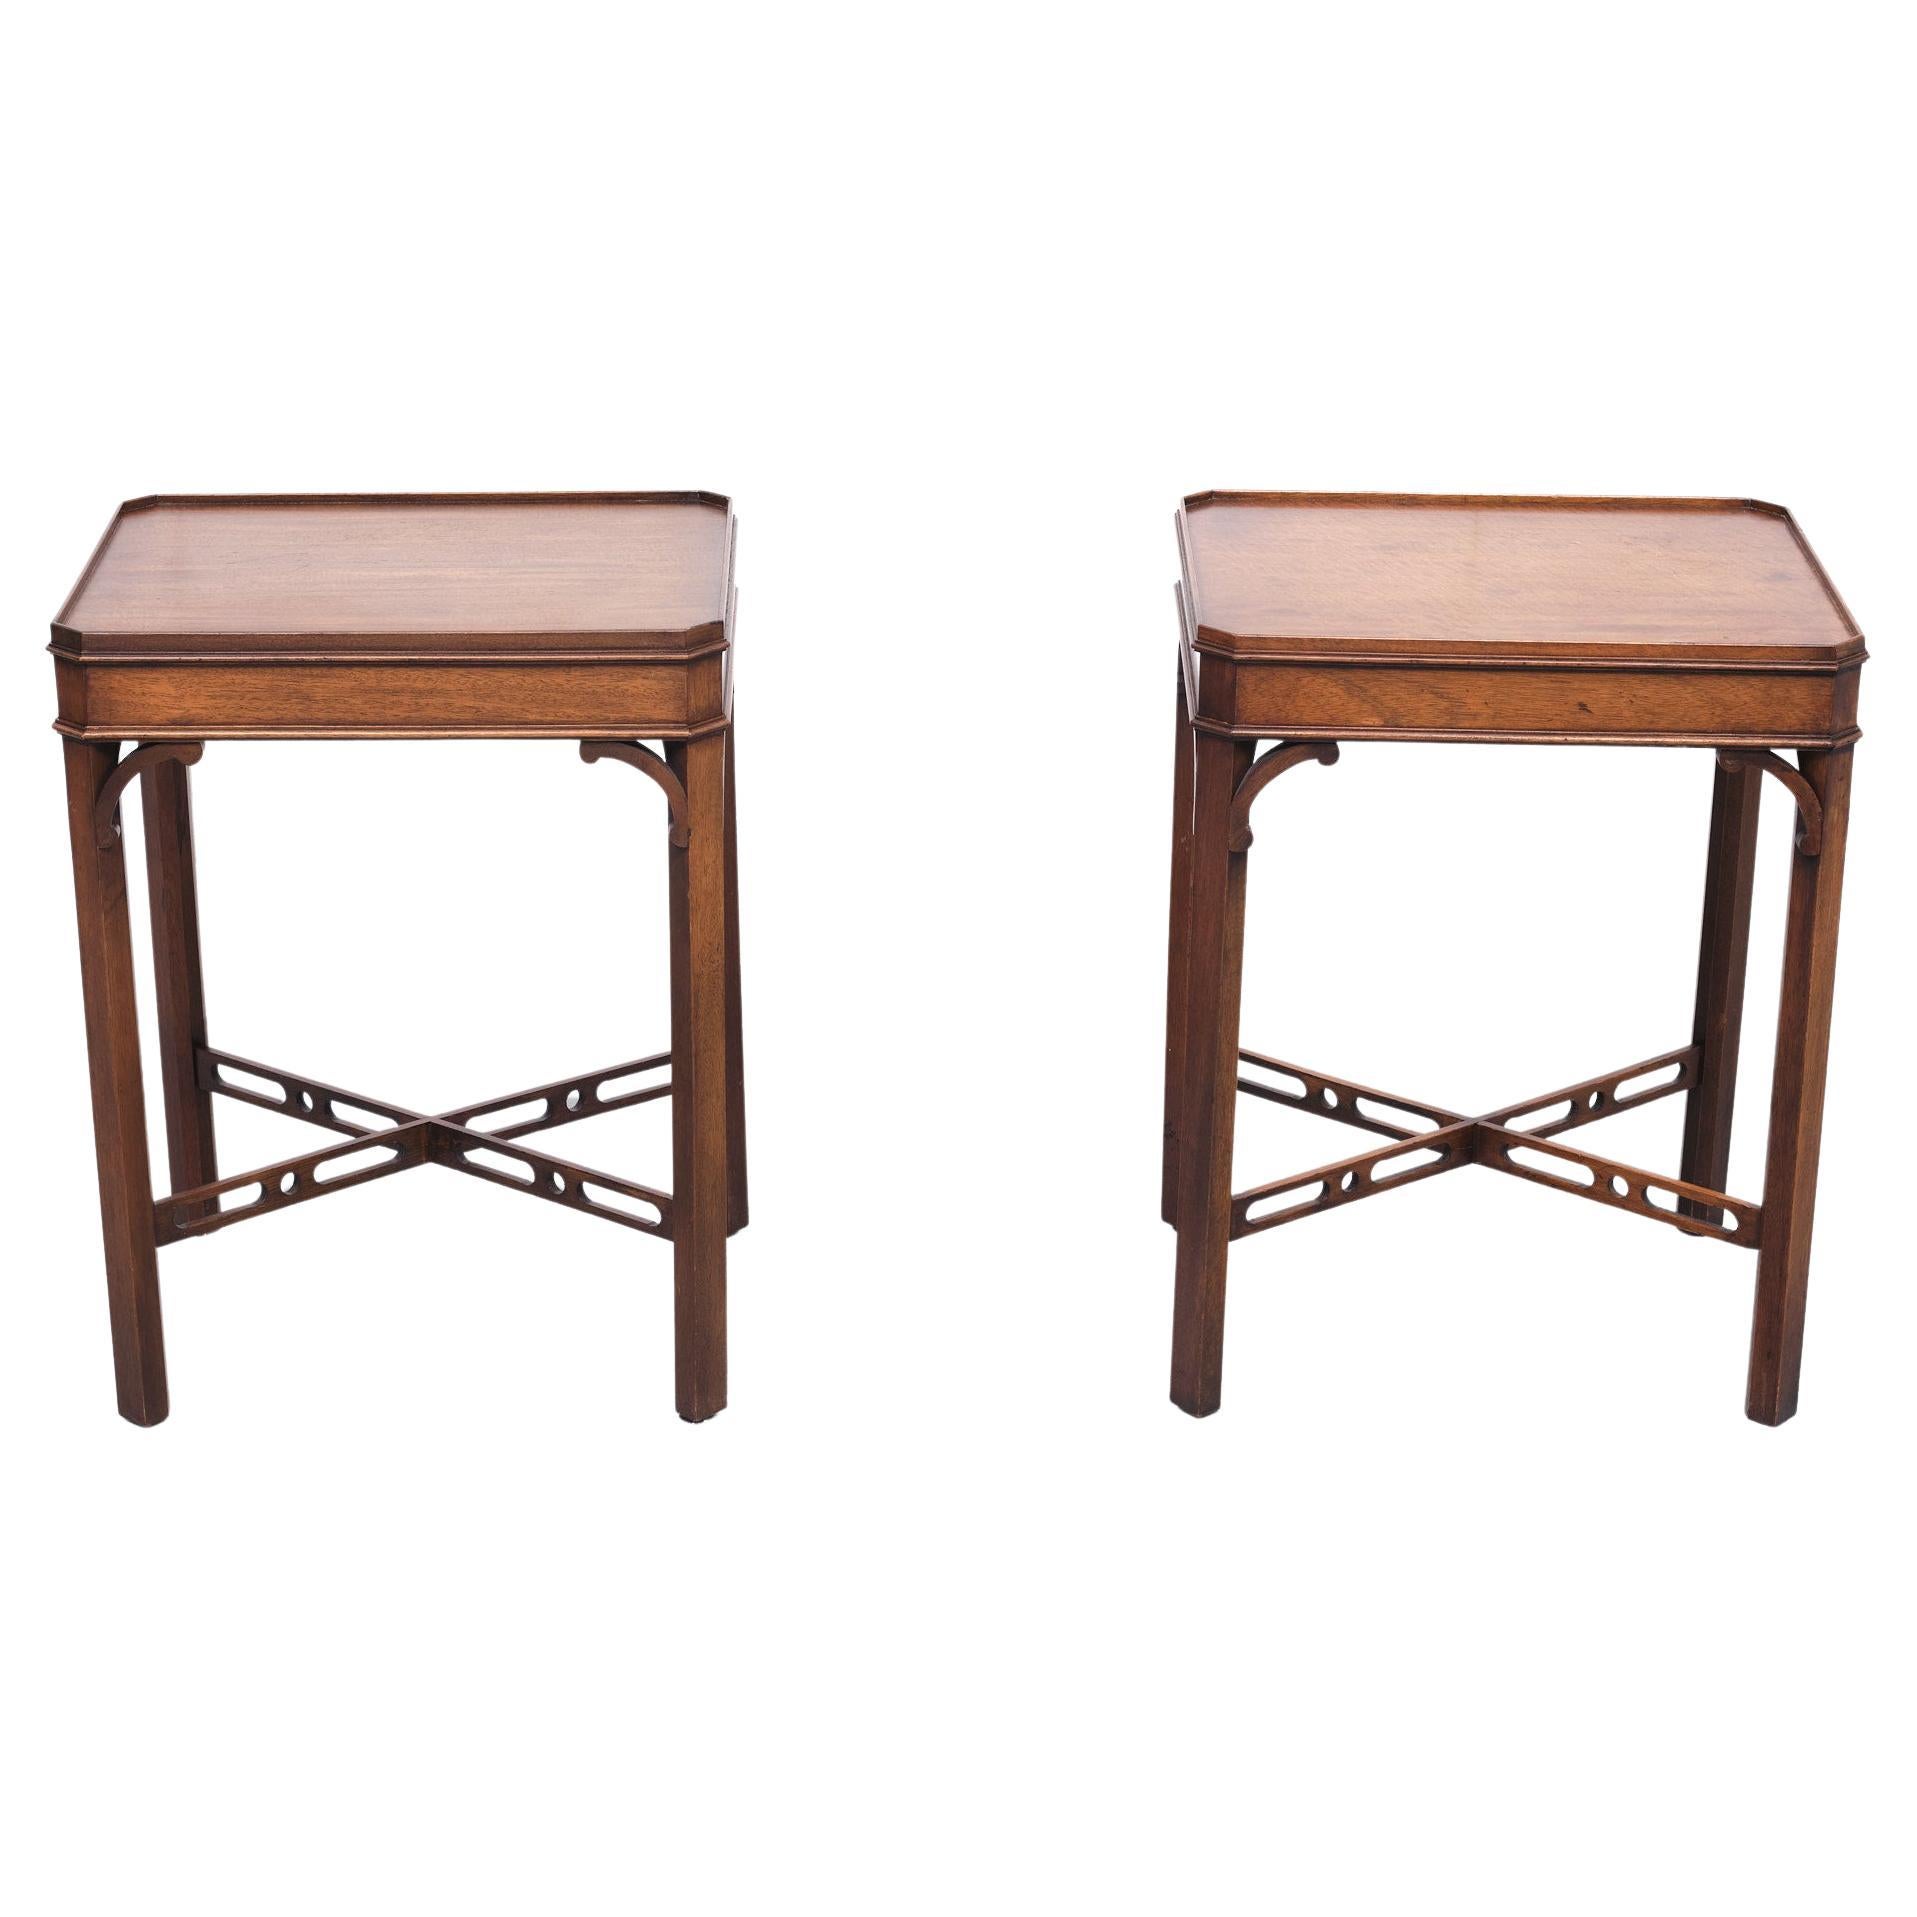 Good quality Bevan Funnell Reprodux Georgian revival side tables.
Having pierced cross legs. Beautiful set with slightly raised edges. Beautiful handmade side tables. Very nice warm color. Marked with labels at the bottom.

